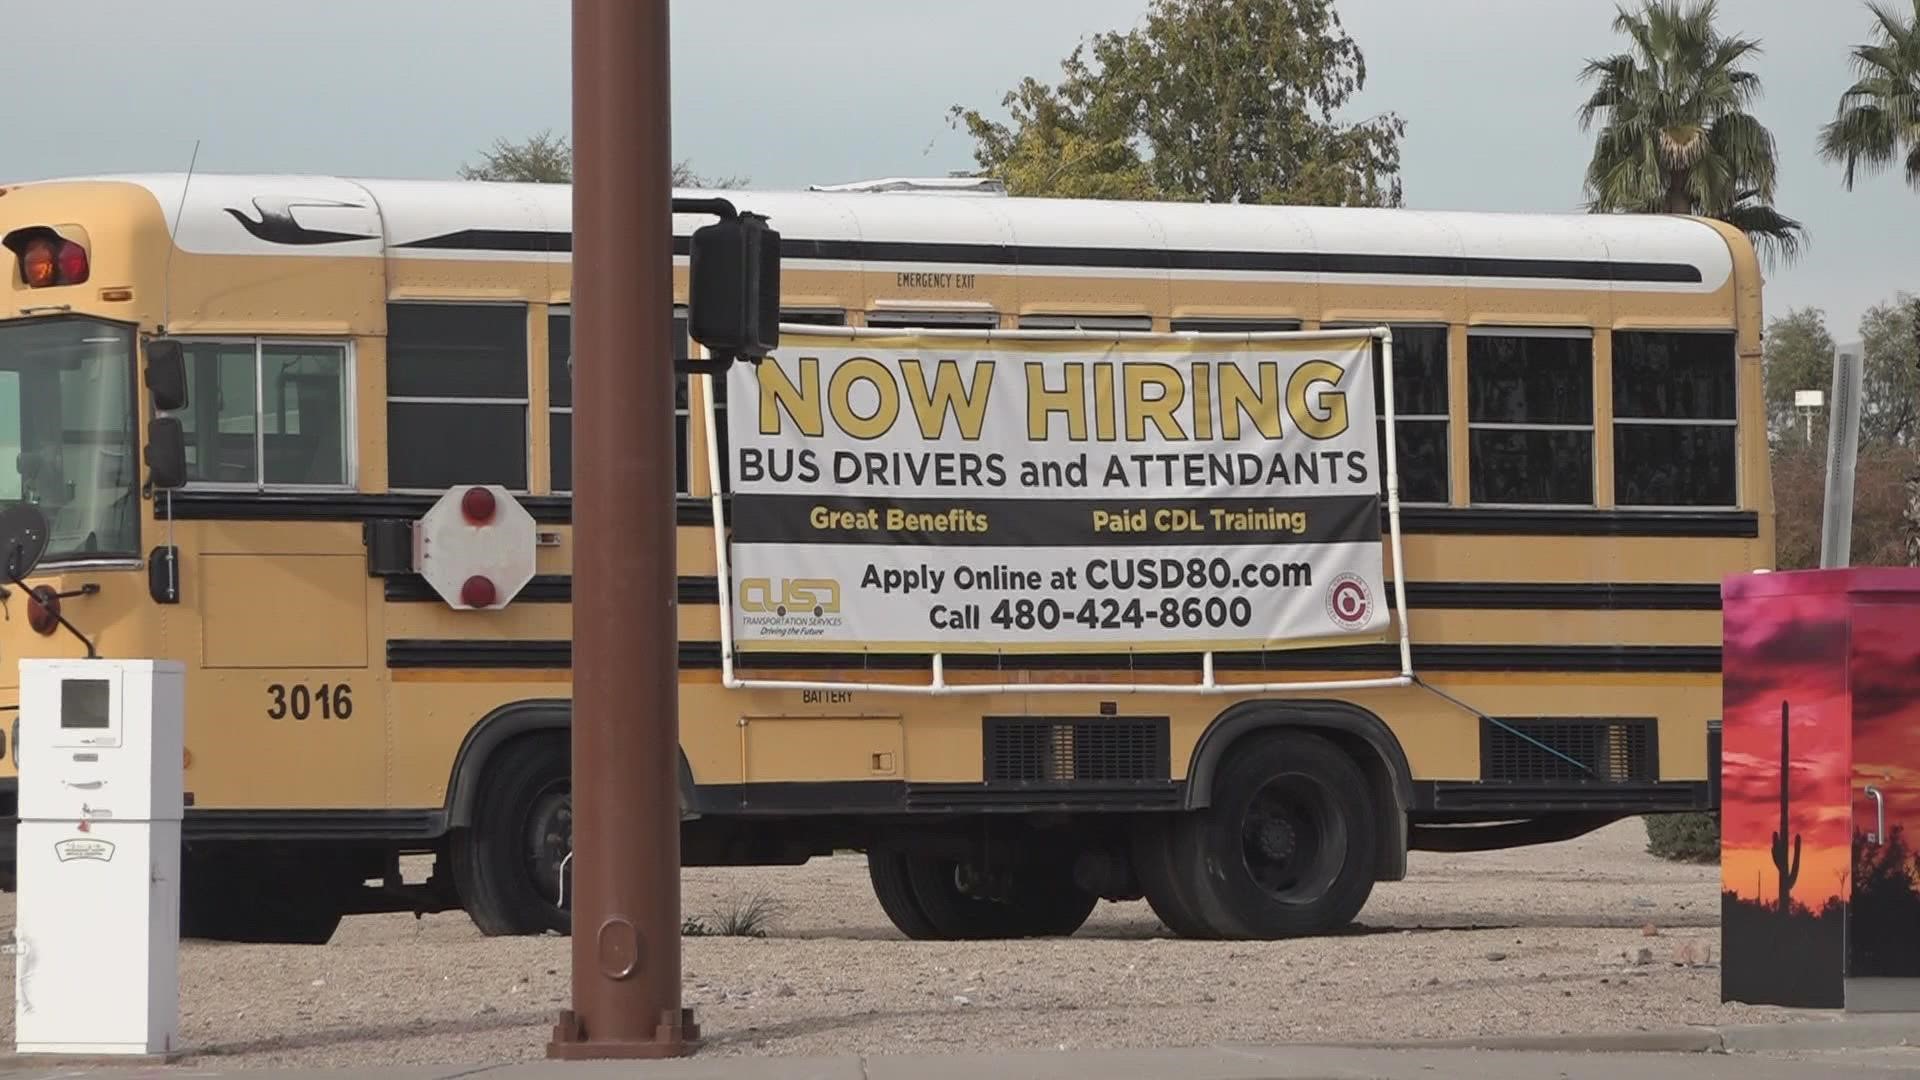 CUSD said they’re looking to fill around 30 bus driver openings. The shortage is something the district has been dealing with for about five years now.